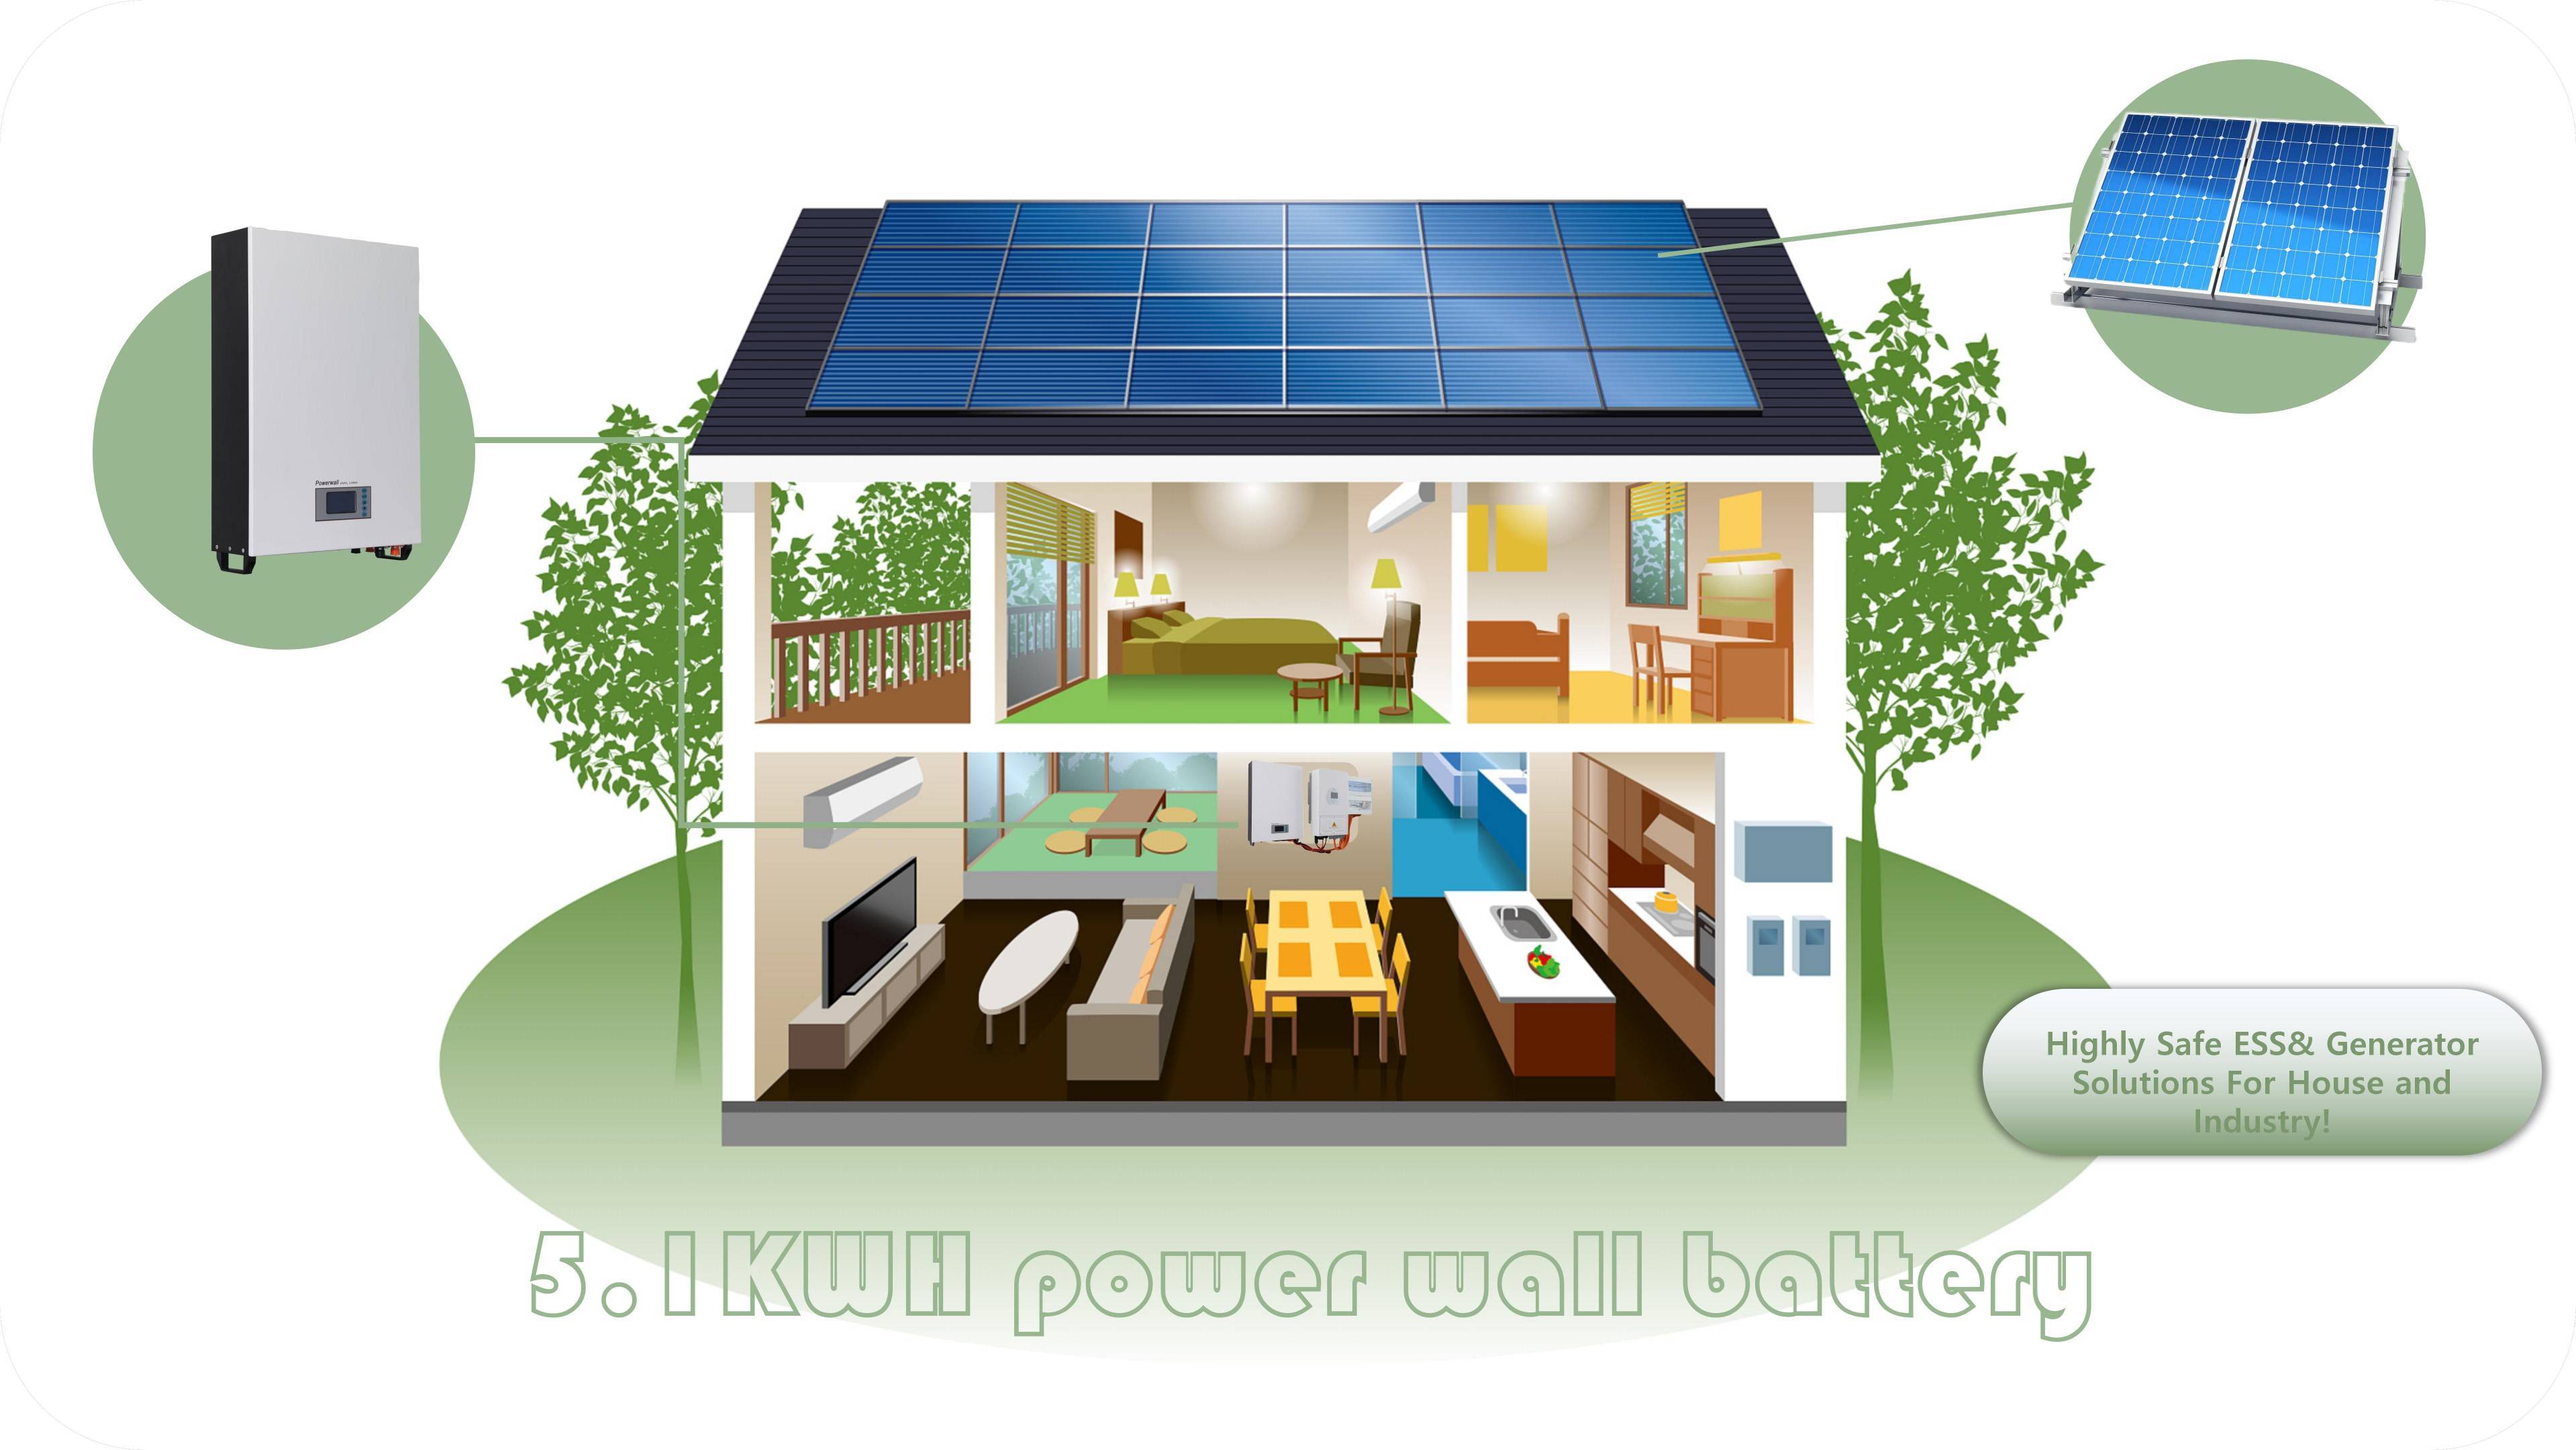 E-lary 10kwh 15Kwh 20kwh Powerwall Batteries Details